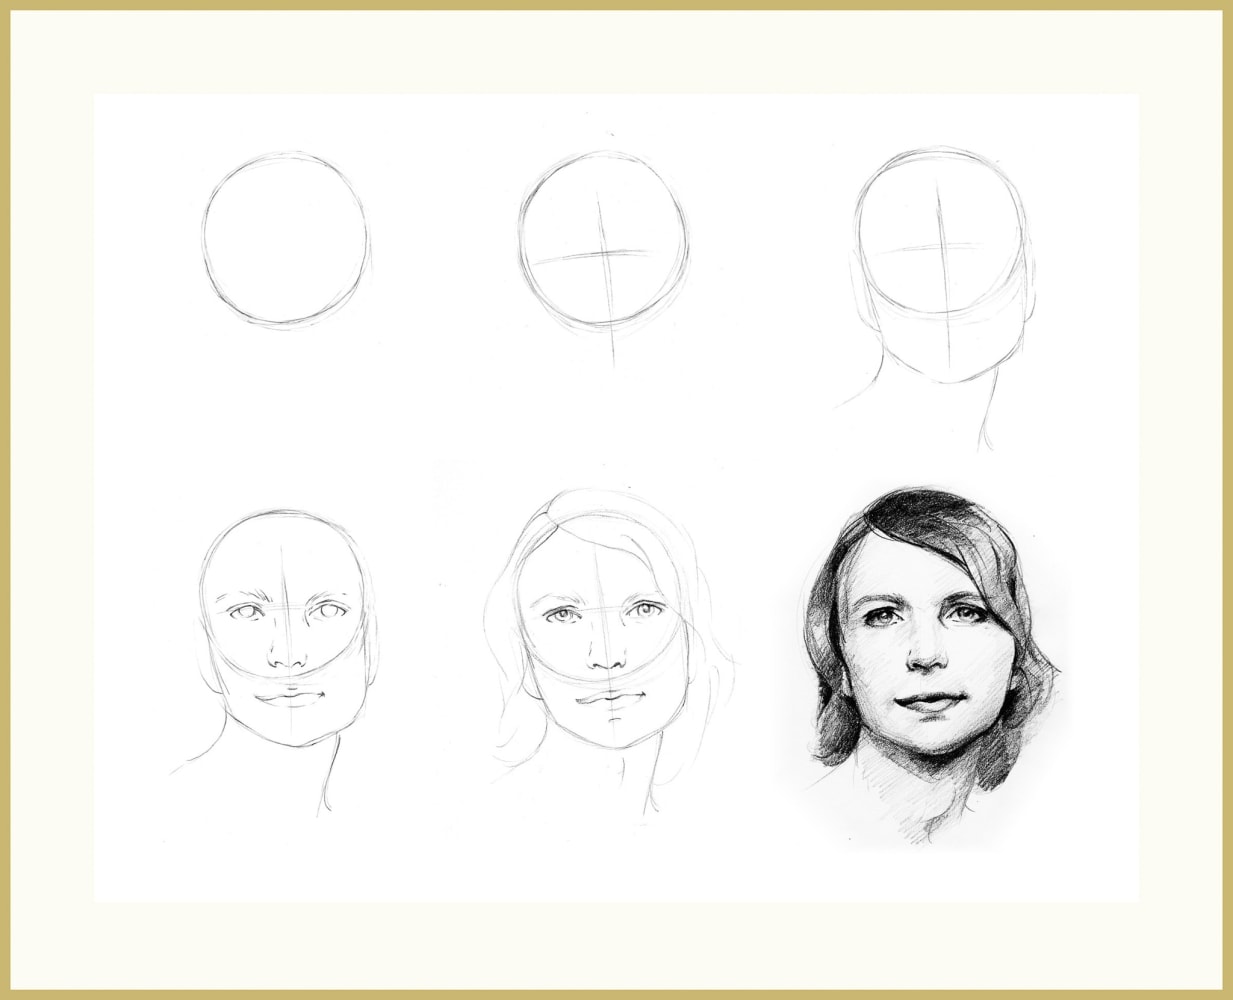 Larry Johnson

Untitled (How To Draw Chelsea Manning)

2023

Archival pigment print

38 3/4 x 48 x 2 inches (98.4 x 121.9 x 5.1 cm)

32 1/2 x 42 inches (97.8 x 106.7 cm) Paper size

Edition of 4, with 2AP

LJ 879

$45,000

&amp;nbsp;

*please note the frame in image above is rendered*